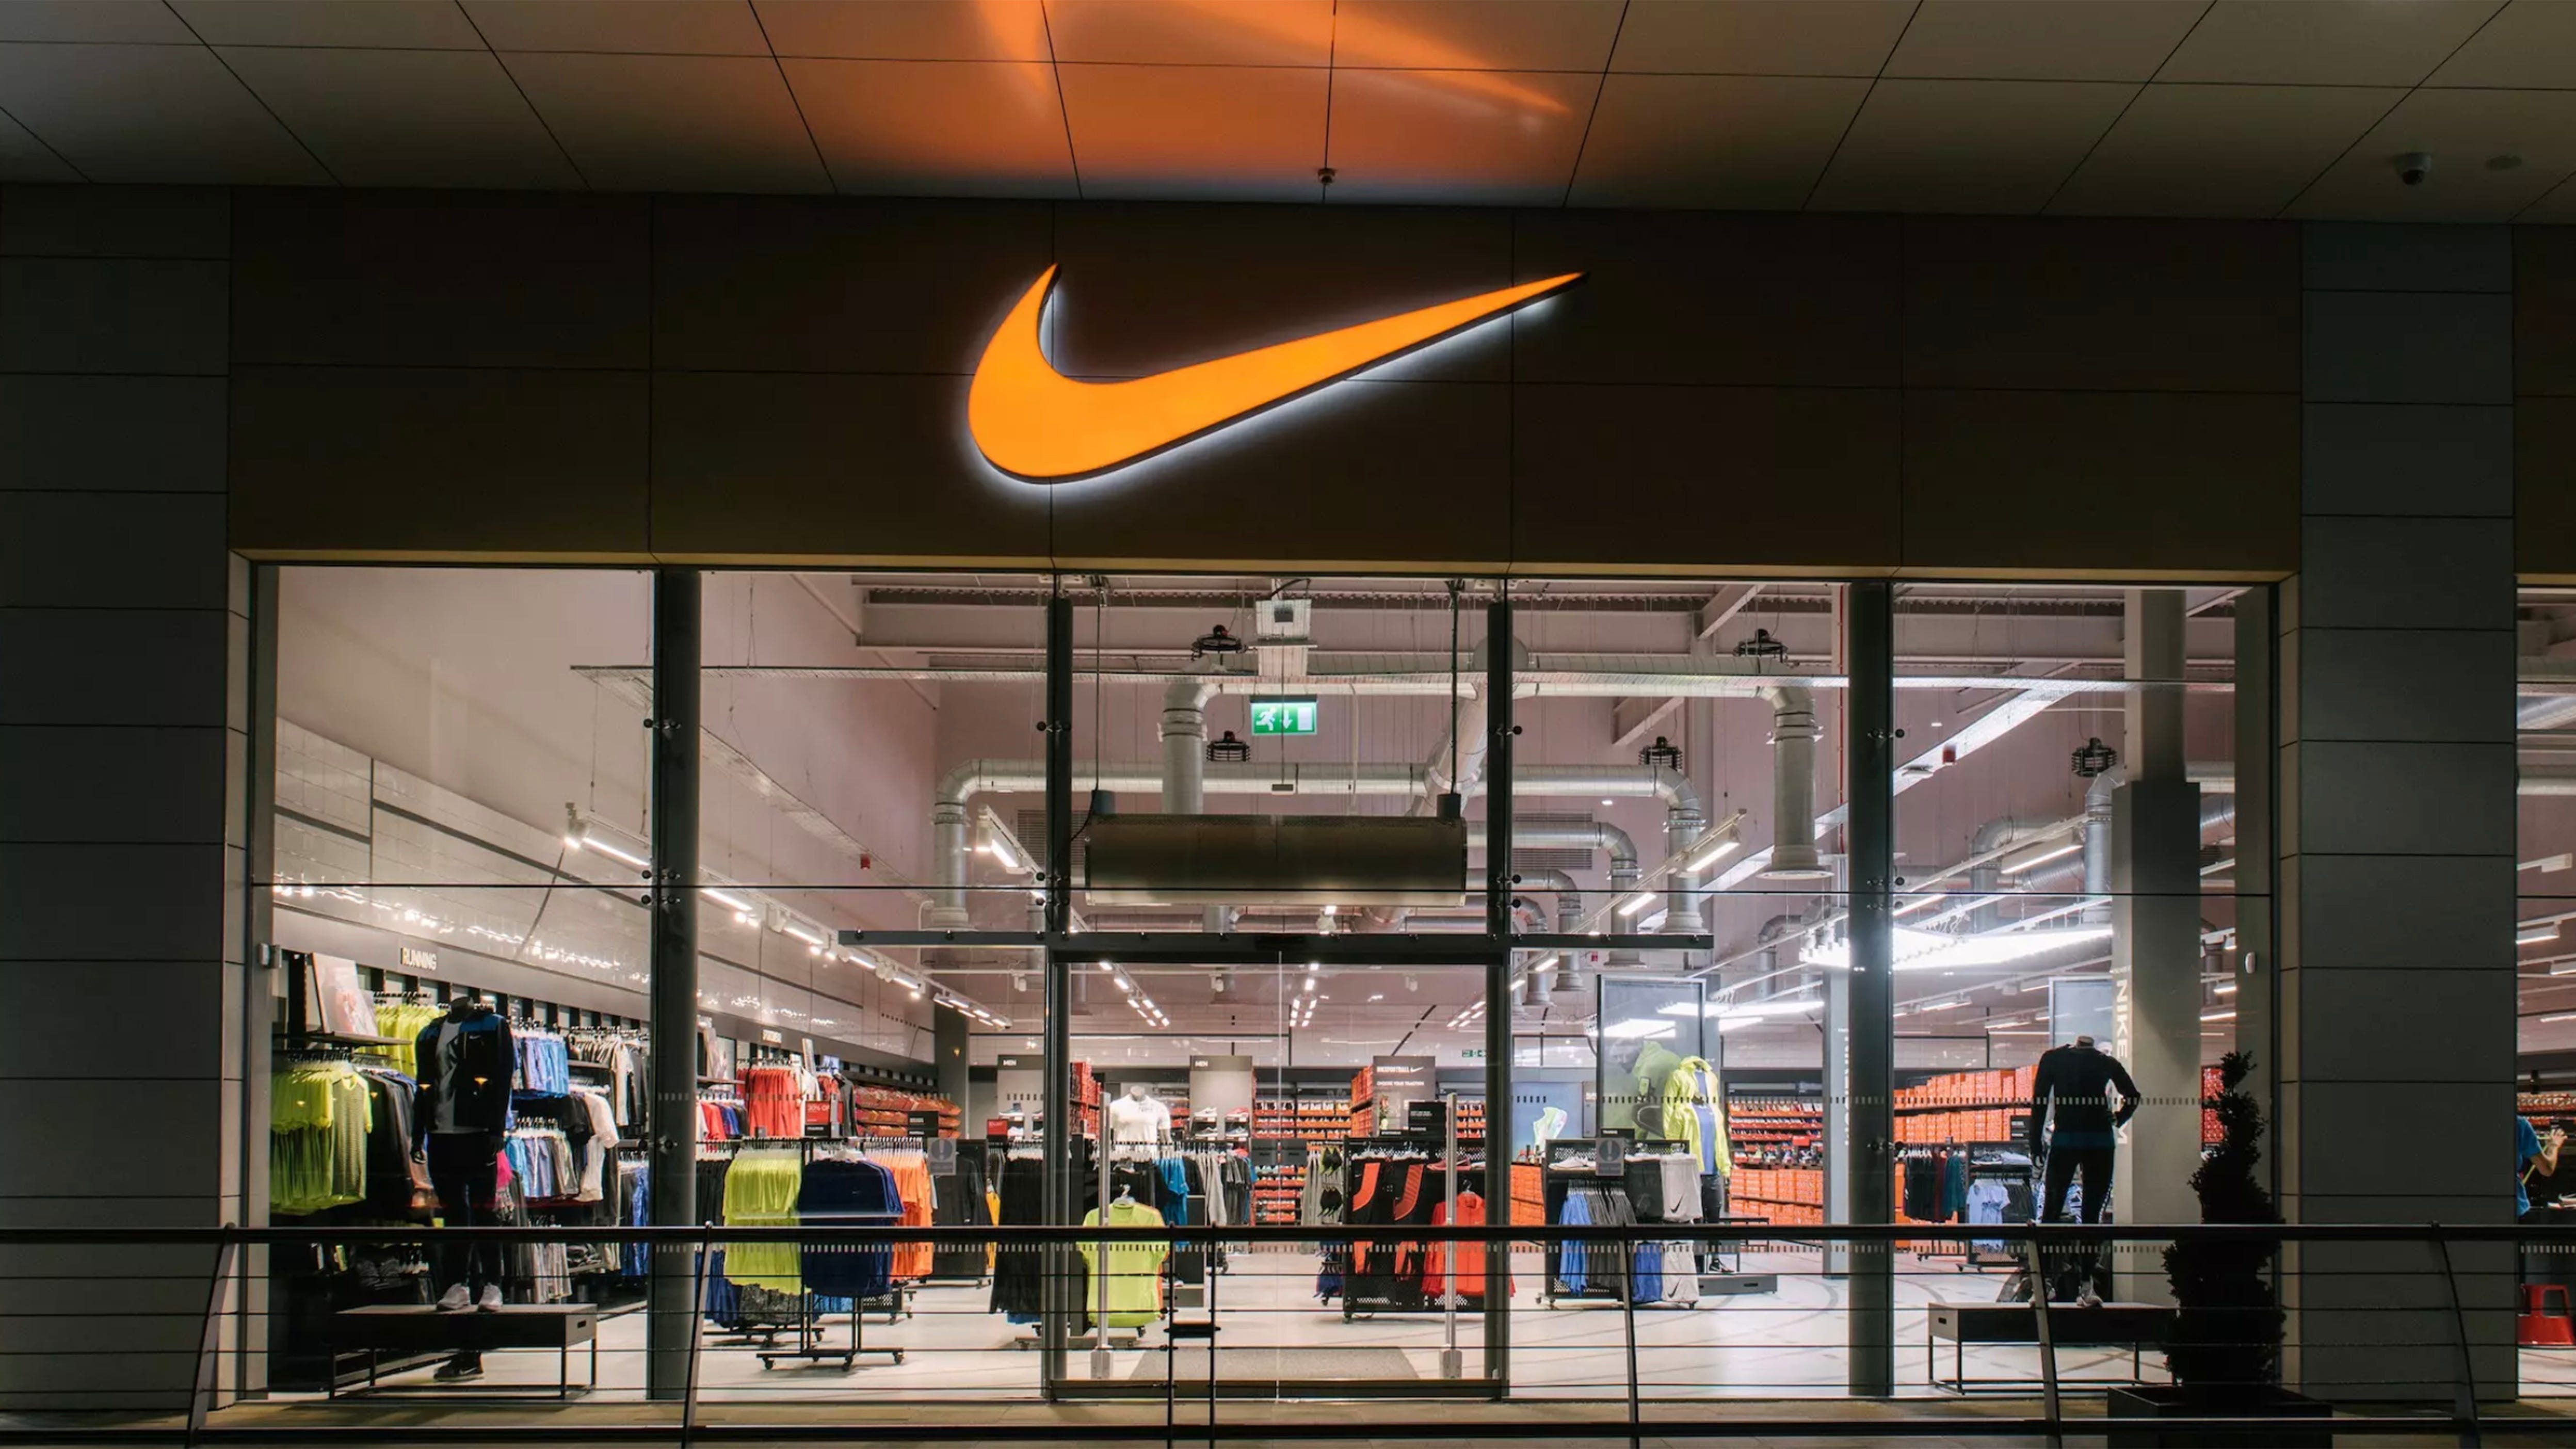 Cyber Monday 2019: The best Nike deal on shoes and gear